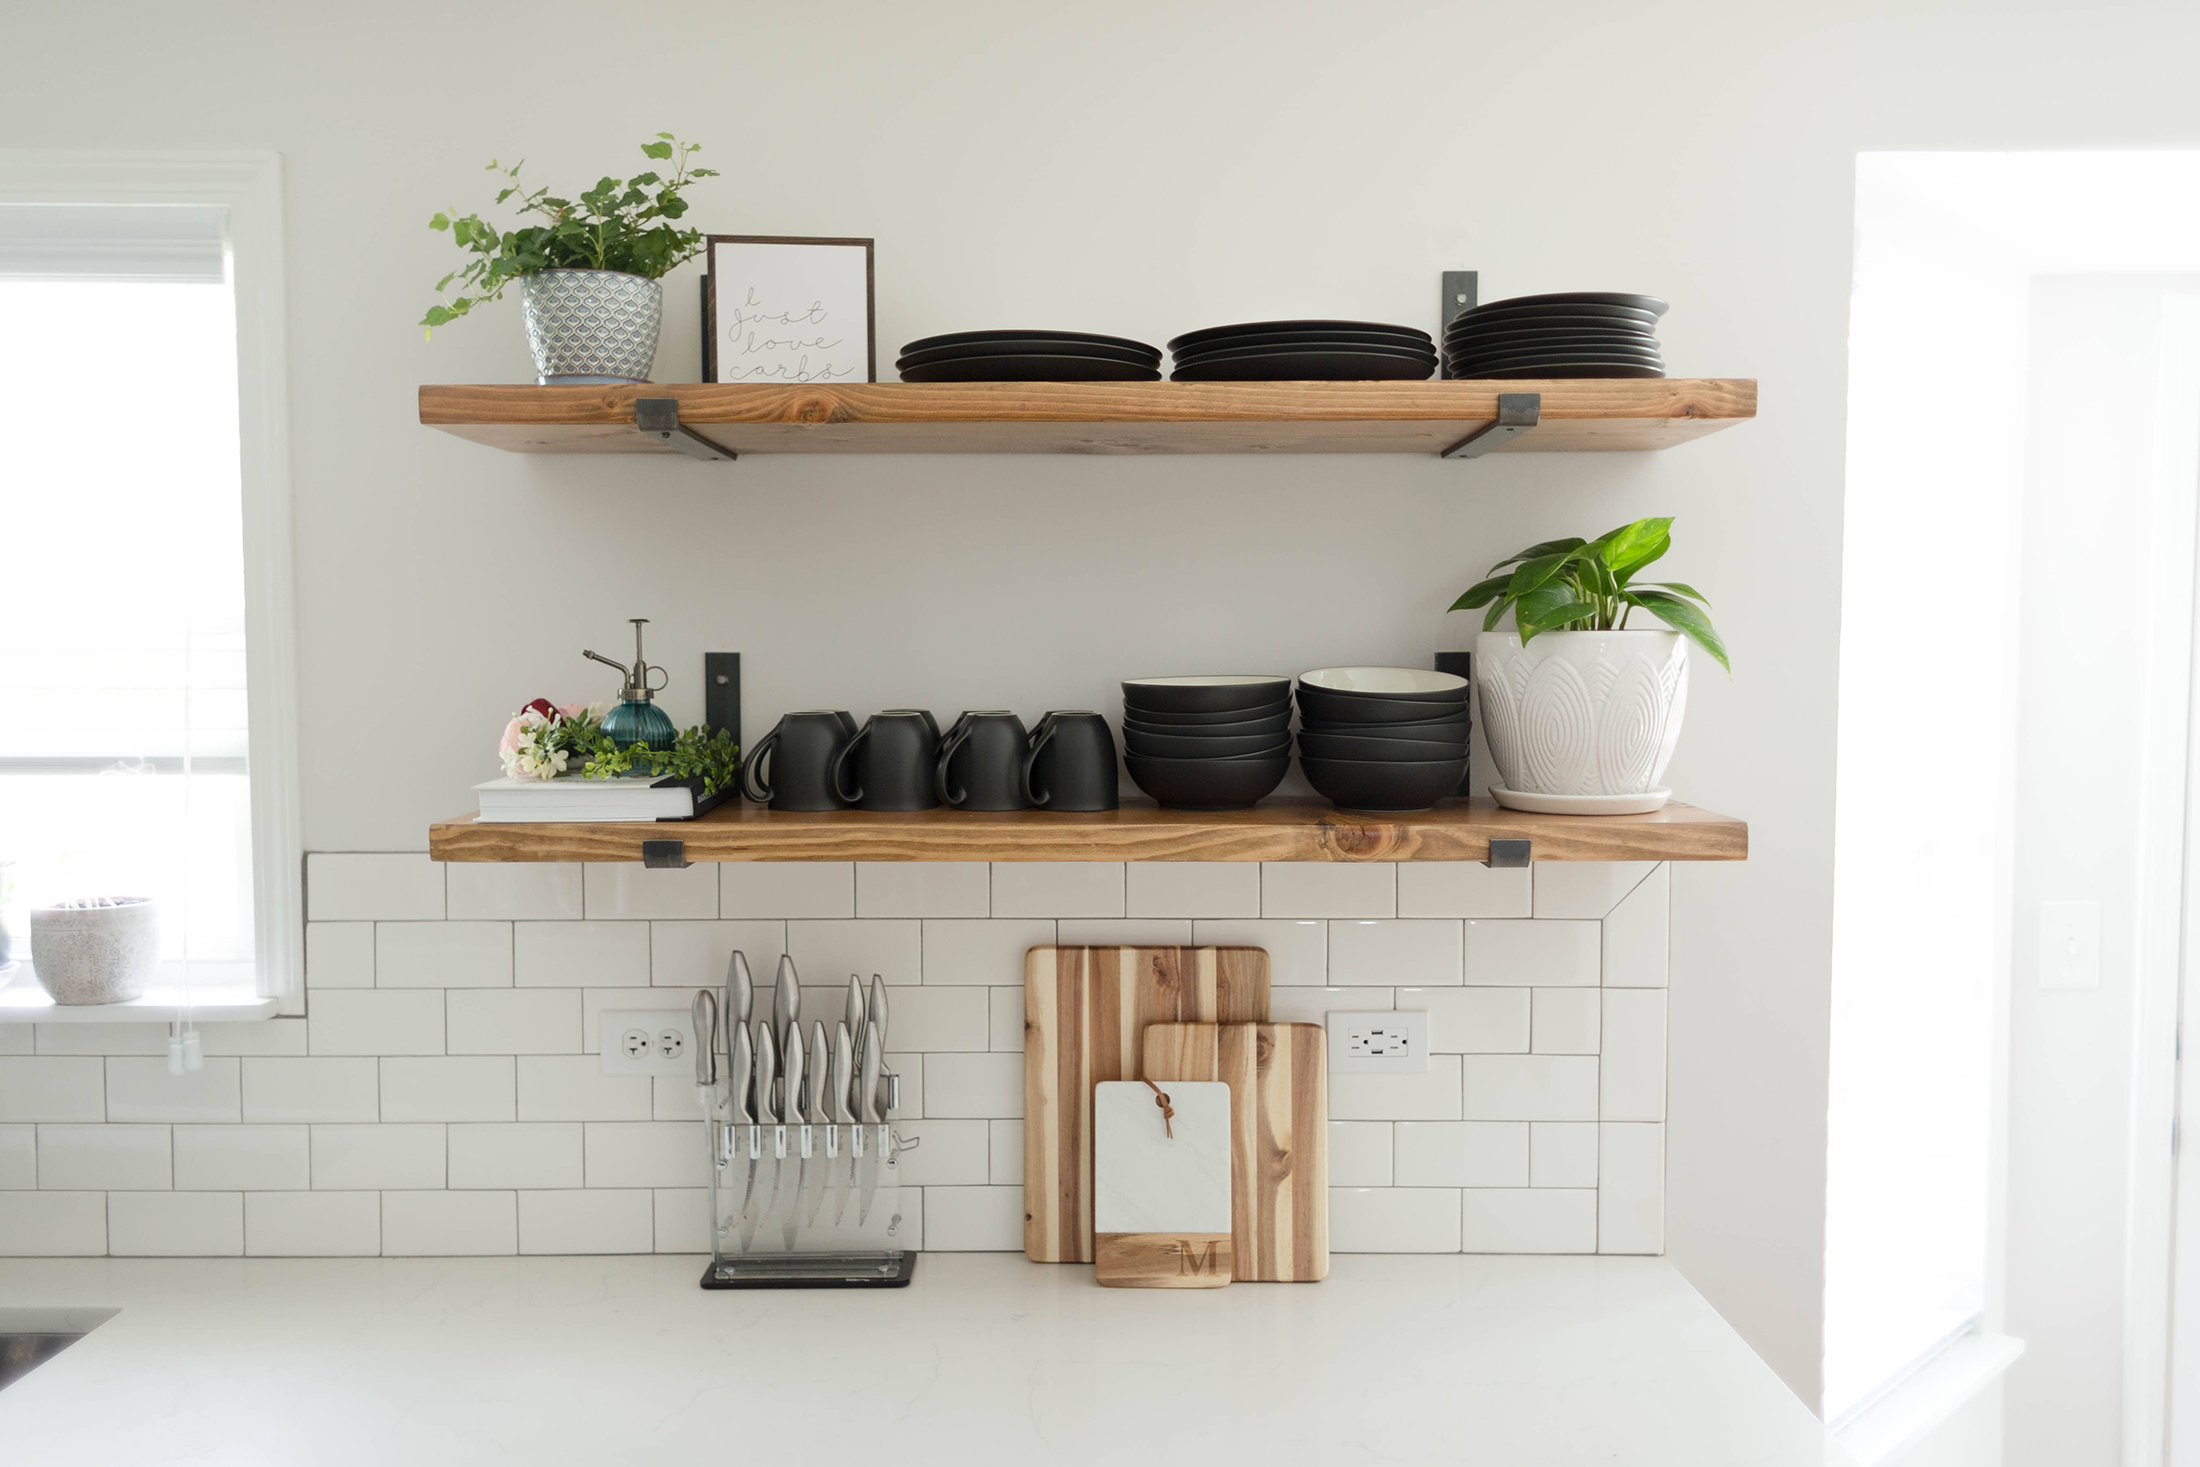 Diy Kitchen Open Shelving Sammy On State, How To Build Open Shelving In Kitchen